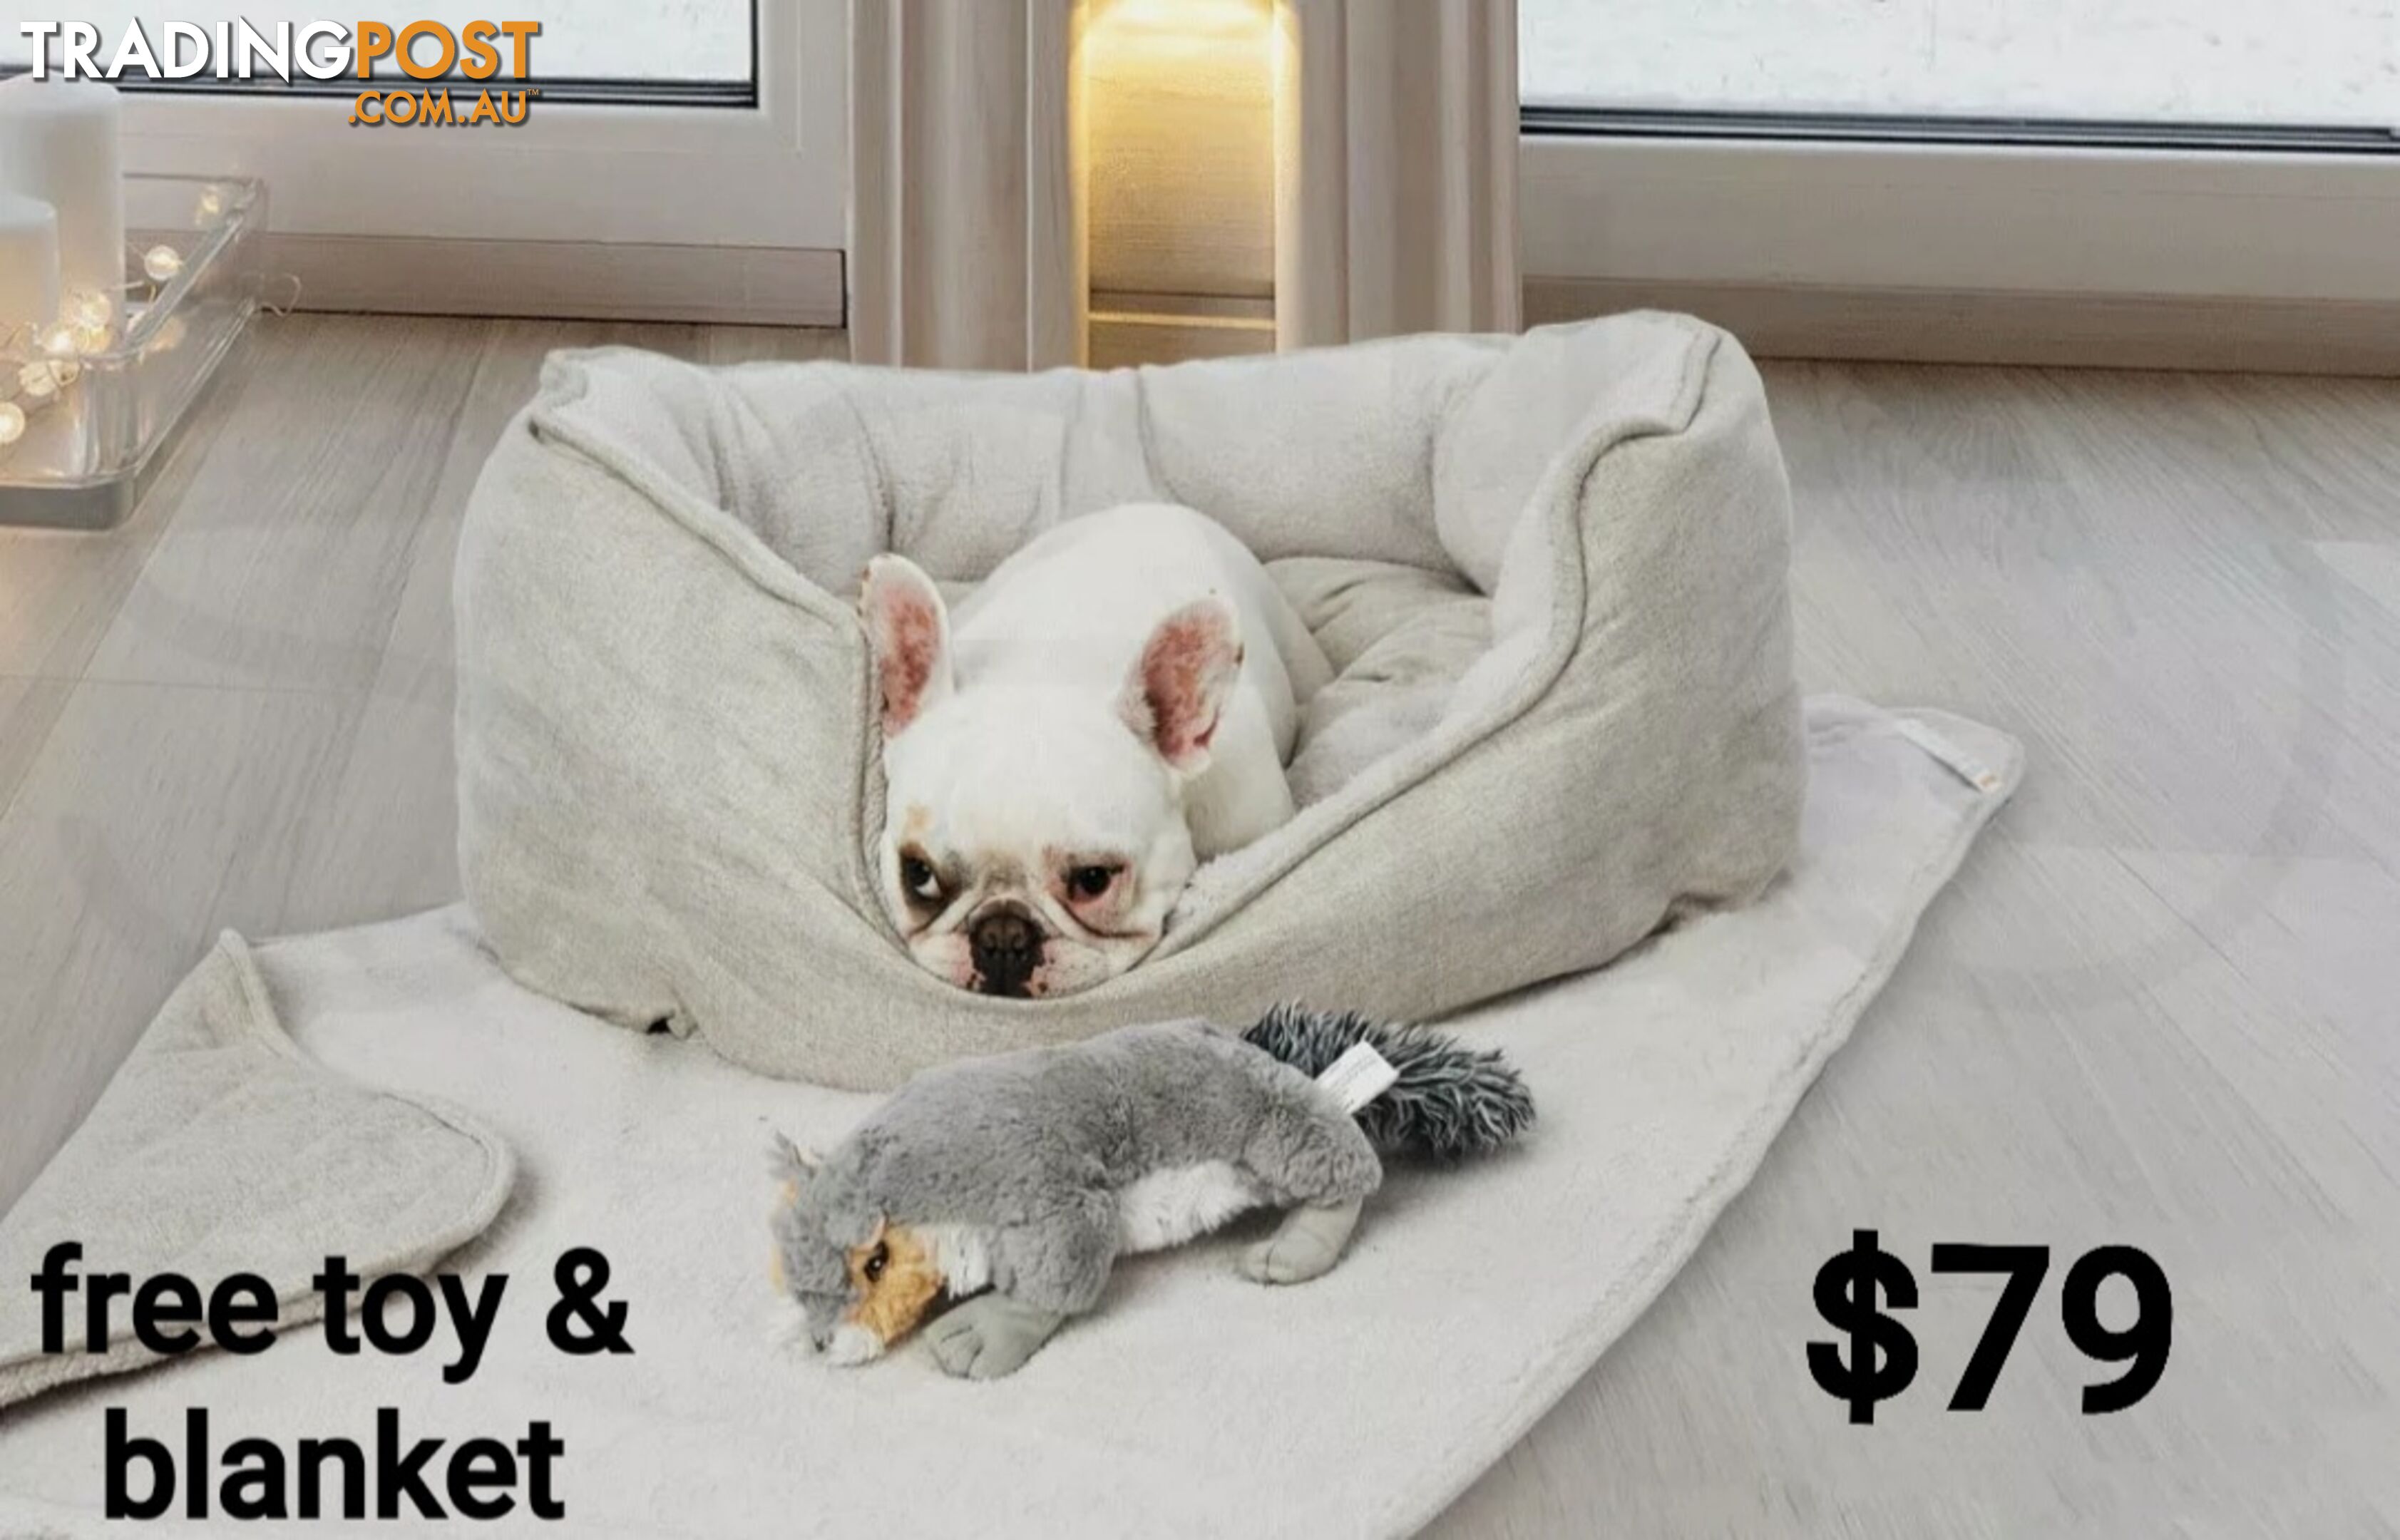 WARM COMFORTABLE TRENDY PUPPY/DOG BEDS